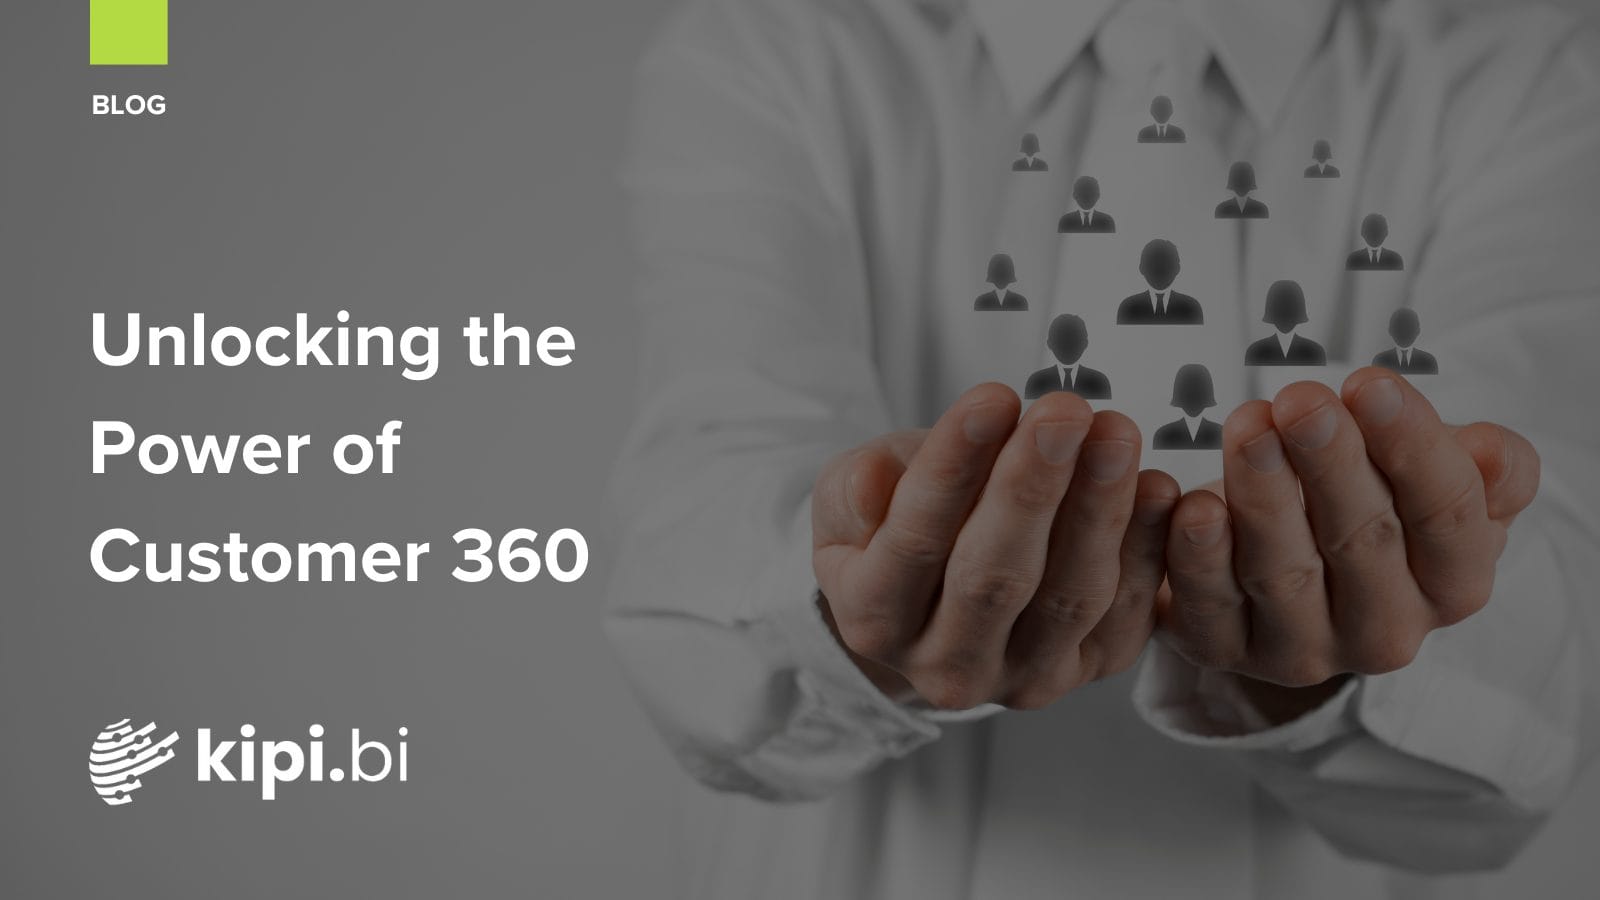 Customer 360 Use Cases for Retail (1)